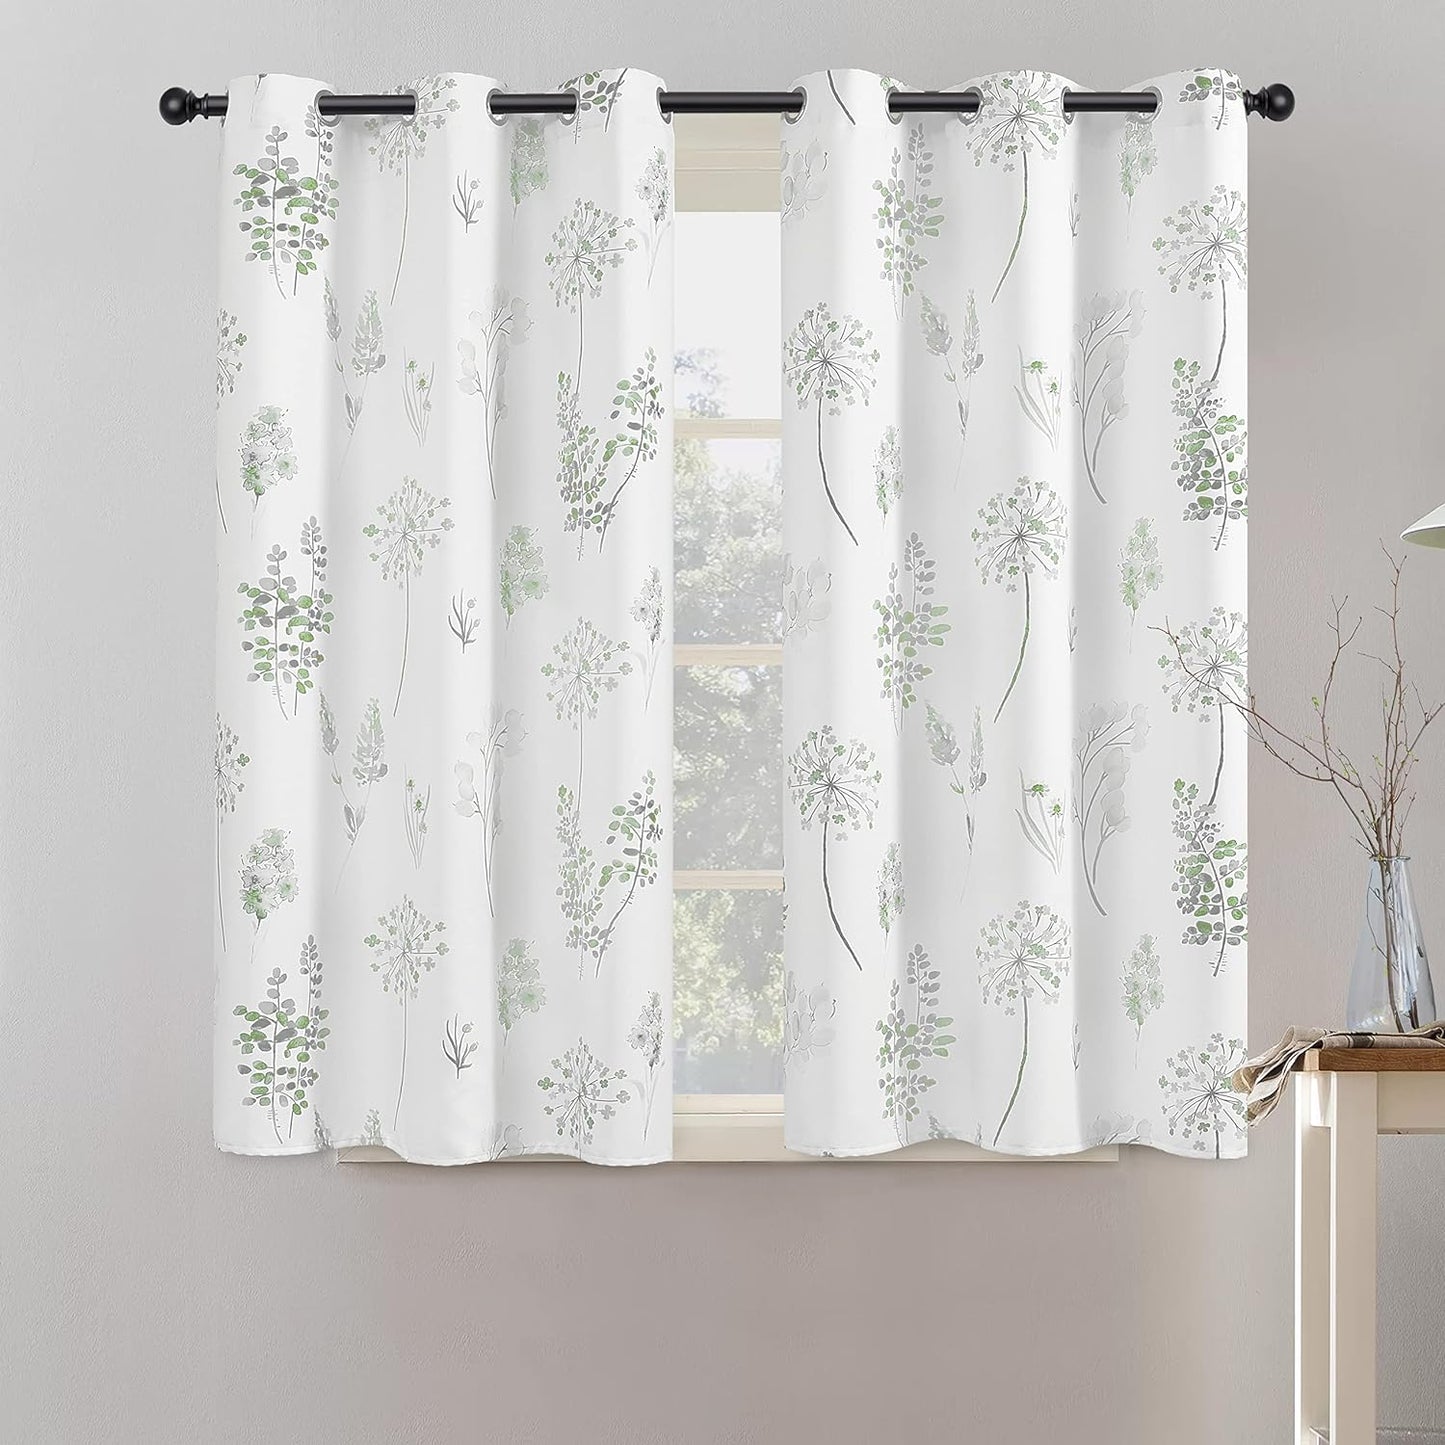 XTMYI 63 Inch Length Sage Green Window Curtains for Bedroom 2 Panels,Room Darkening Watercolor Floral Leaves 80% Blackout Flowered Printed Curtains for Living Room with Grommet,1 Pair Set  XTMYI Green  Grey 34"X45" 